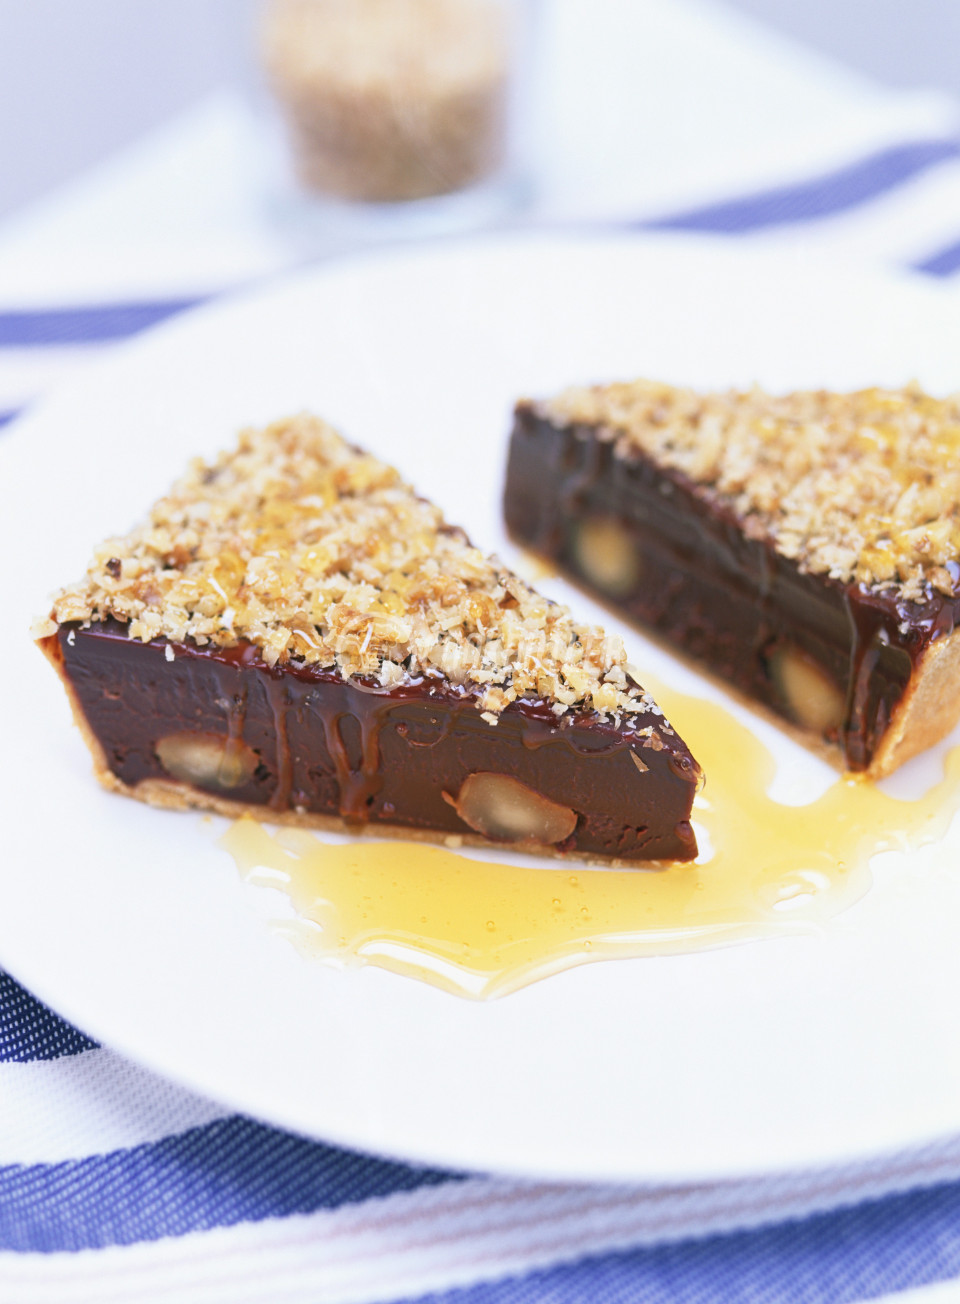 Chocolate tart with macadamia nuts | preview